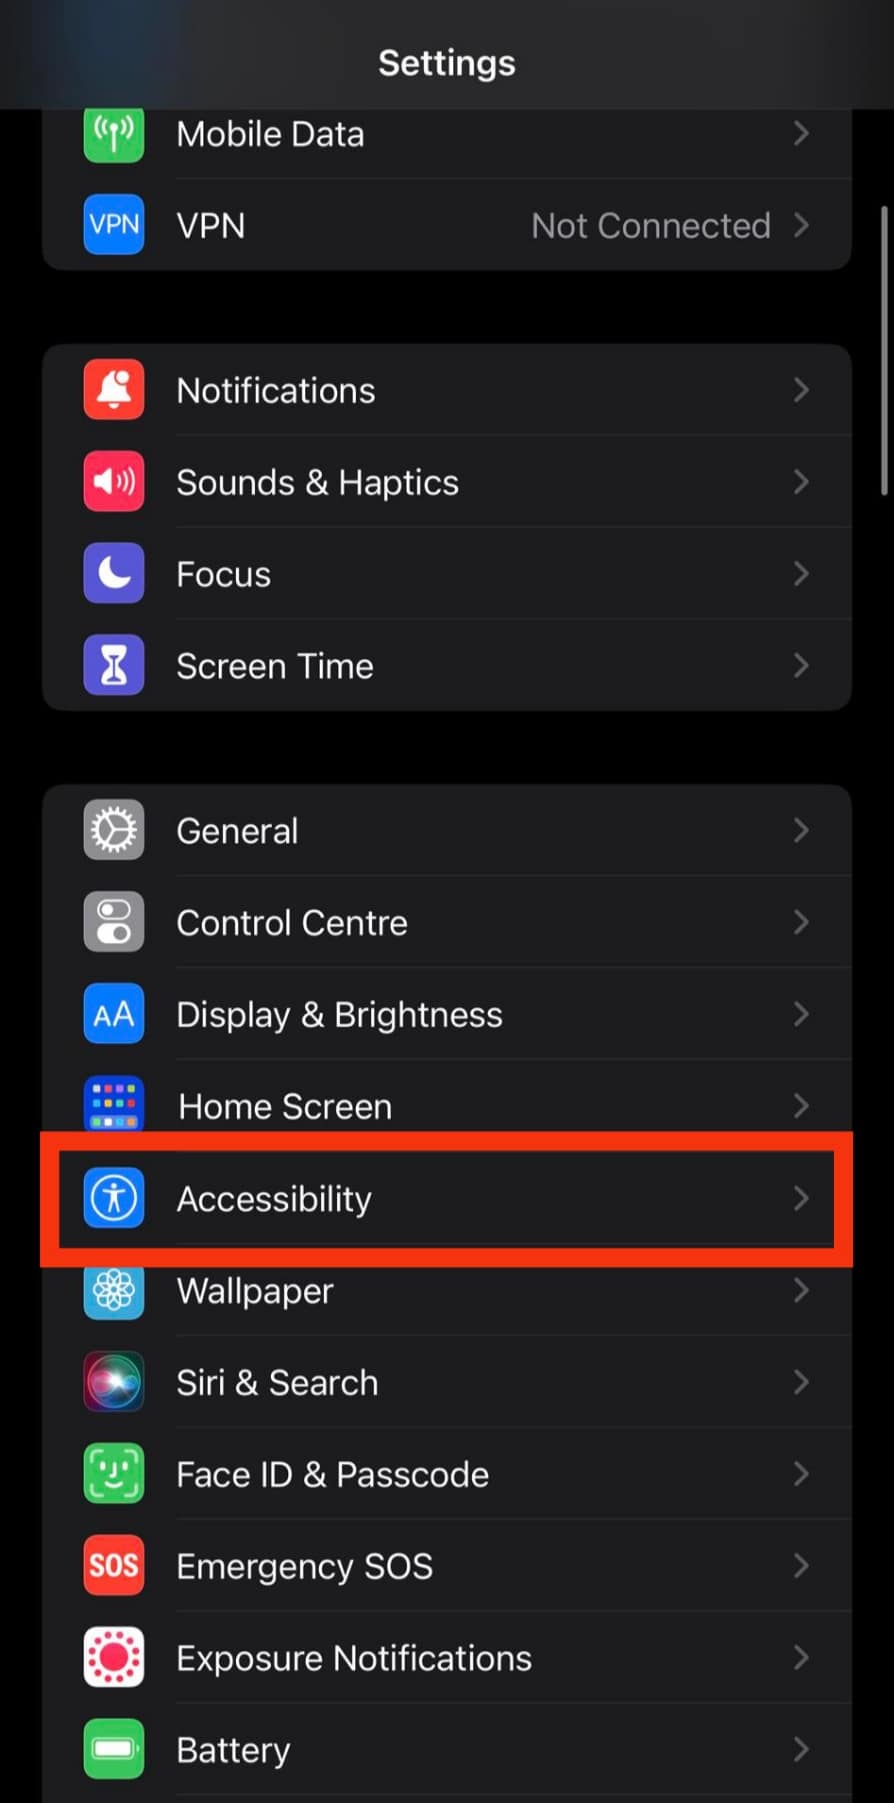 Select Accessibility